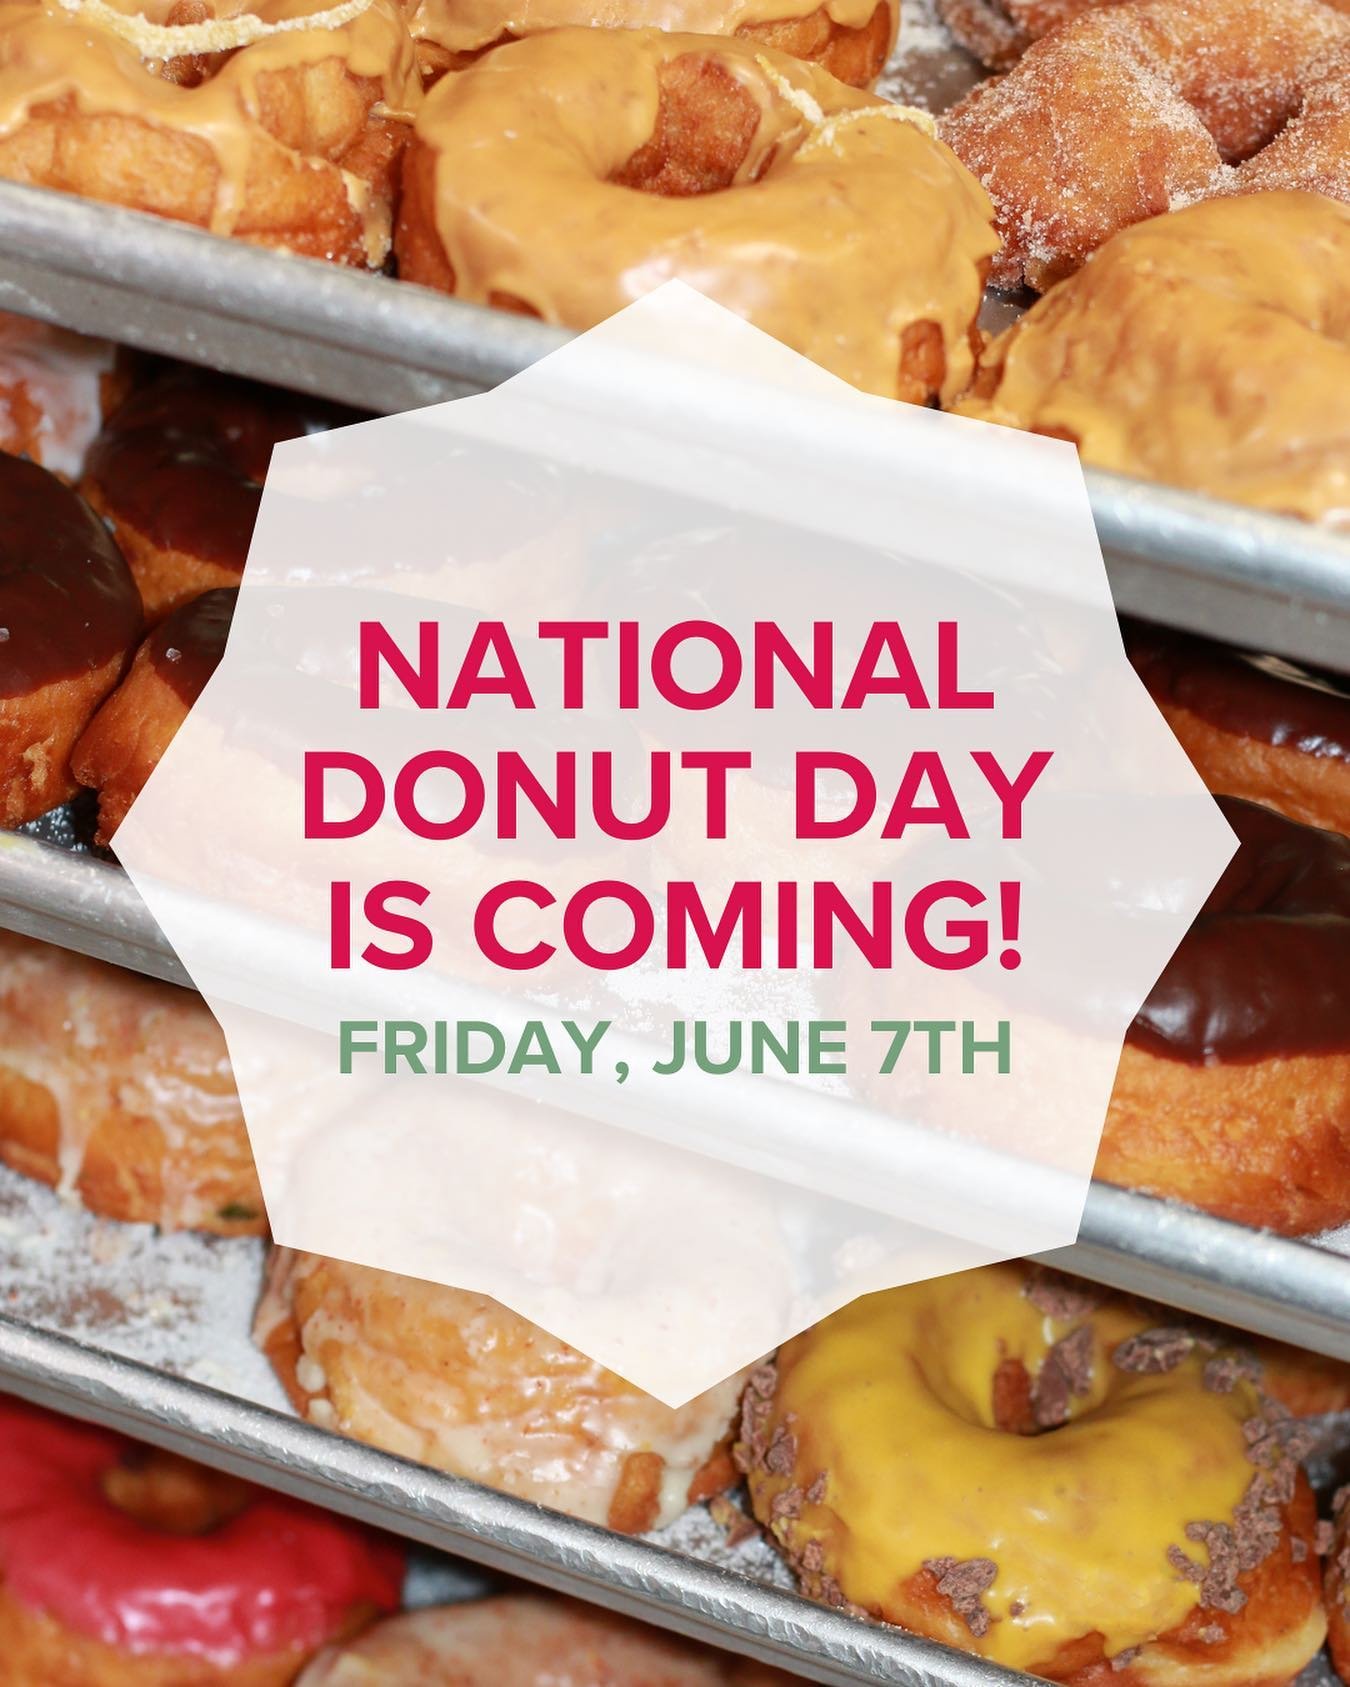 Mark your calendars 🗓️

Next Friday is #NationalDonutDay! We&rsquo;ll be serving some BRAND NEW flavors - all suggested by YOU, our lovely customers. 

Keep your eyes open, we&rsquo;ll be announcing the flavors soon 👀